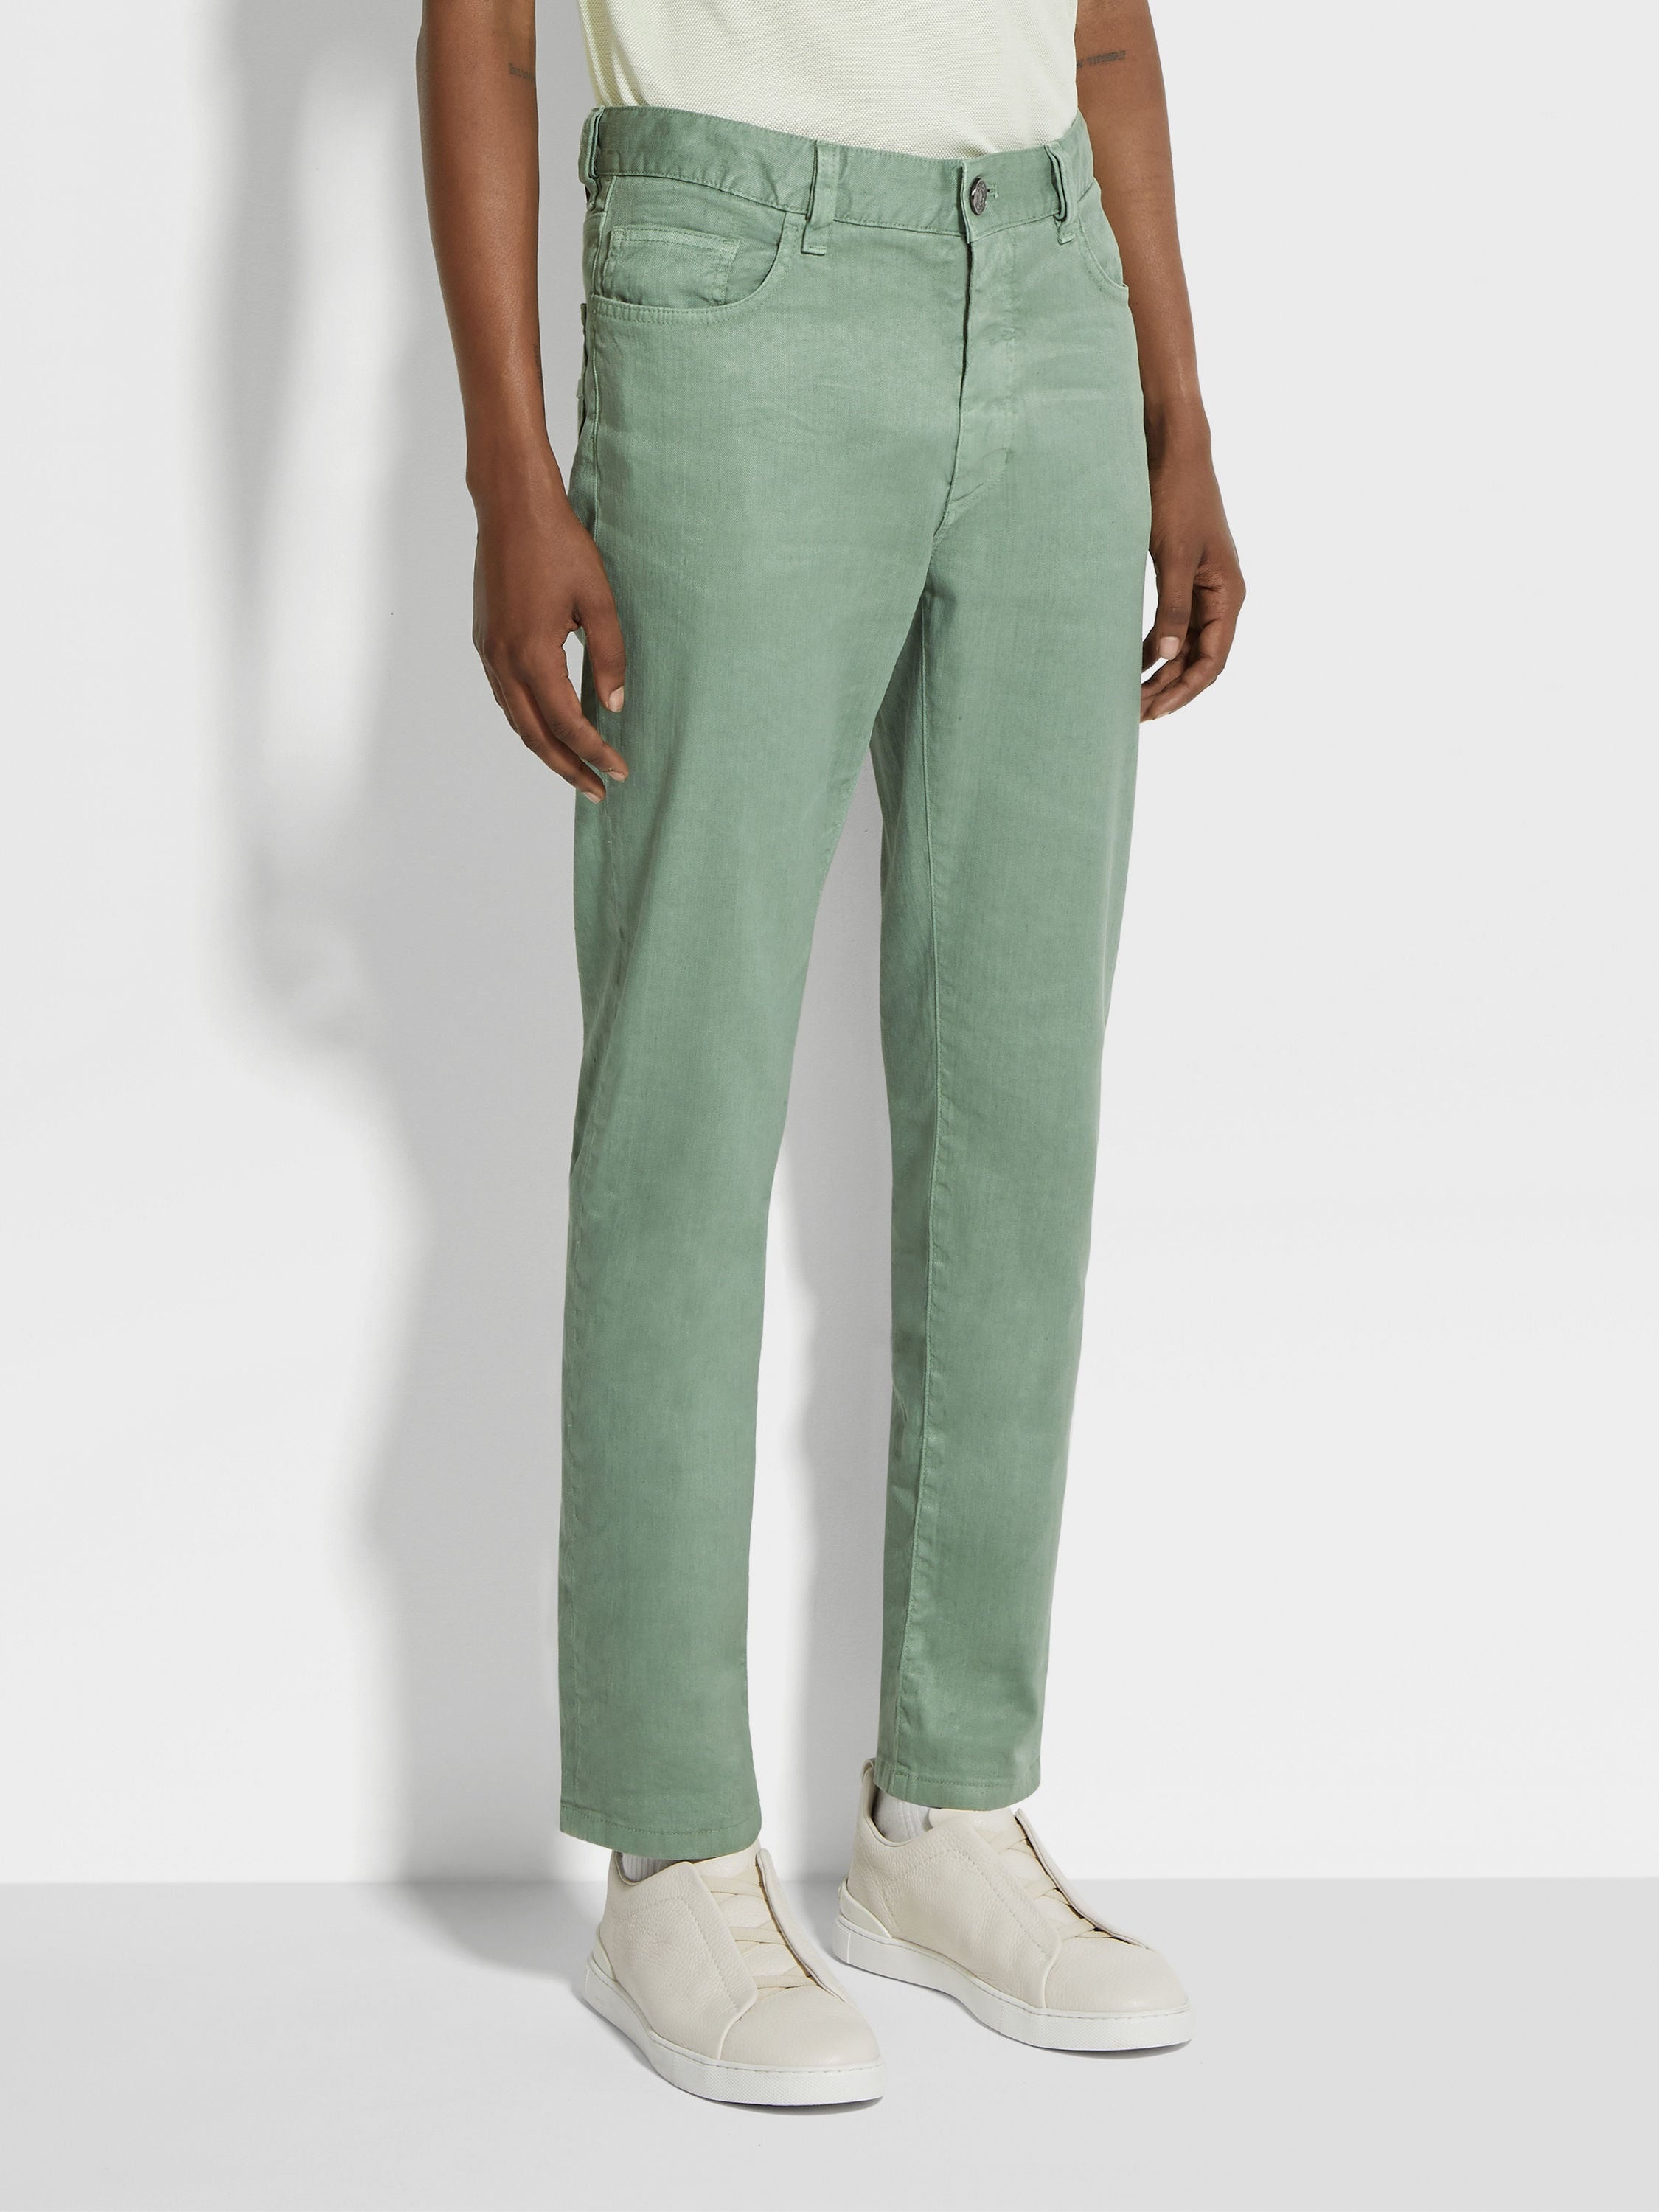 SAGE GREEN STRETCH LINEN AND COTTON ROCCIA JEANS - 4